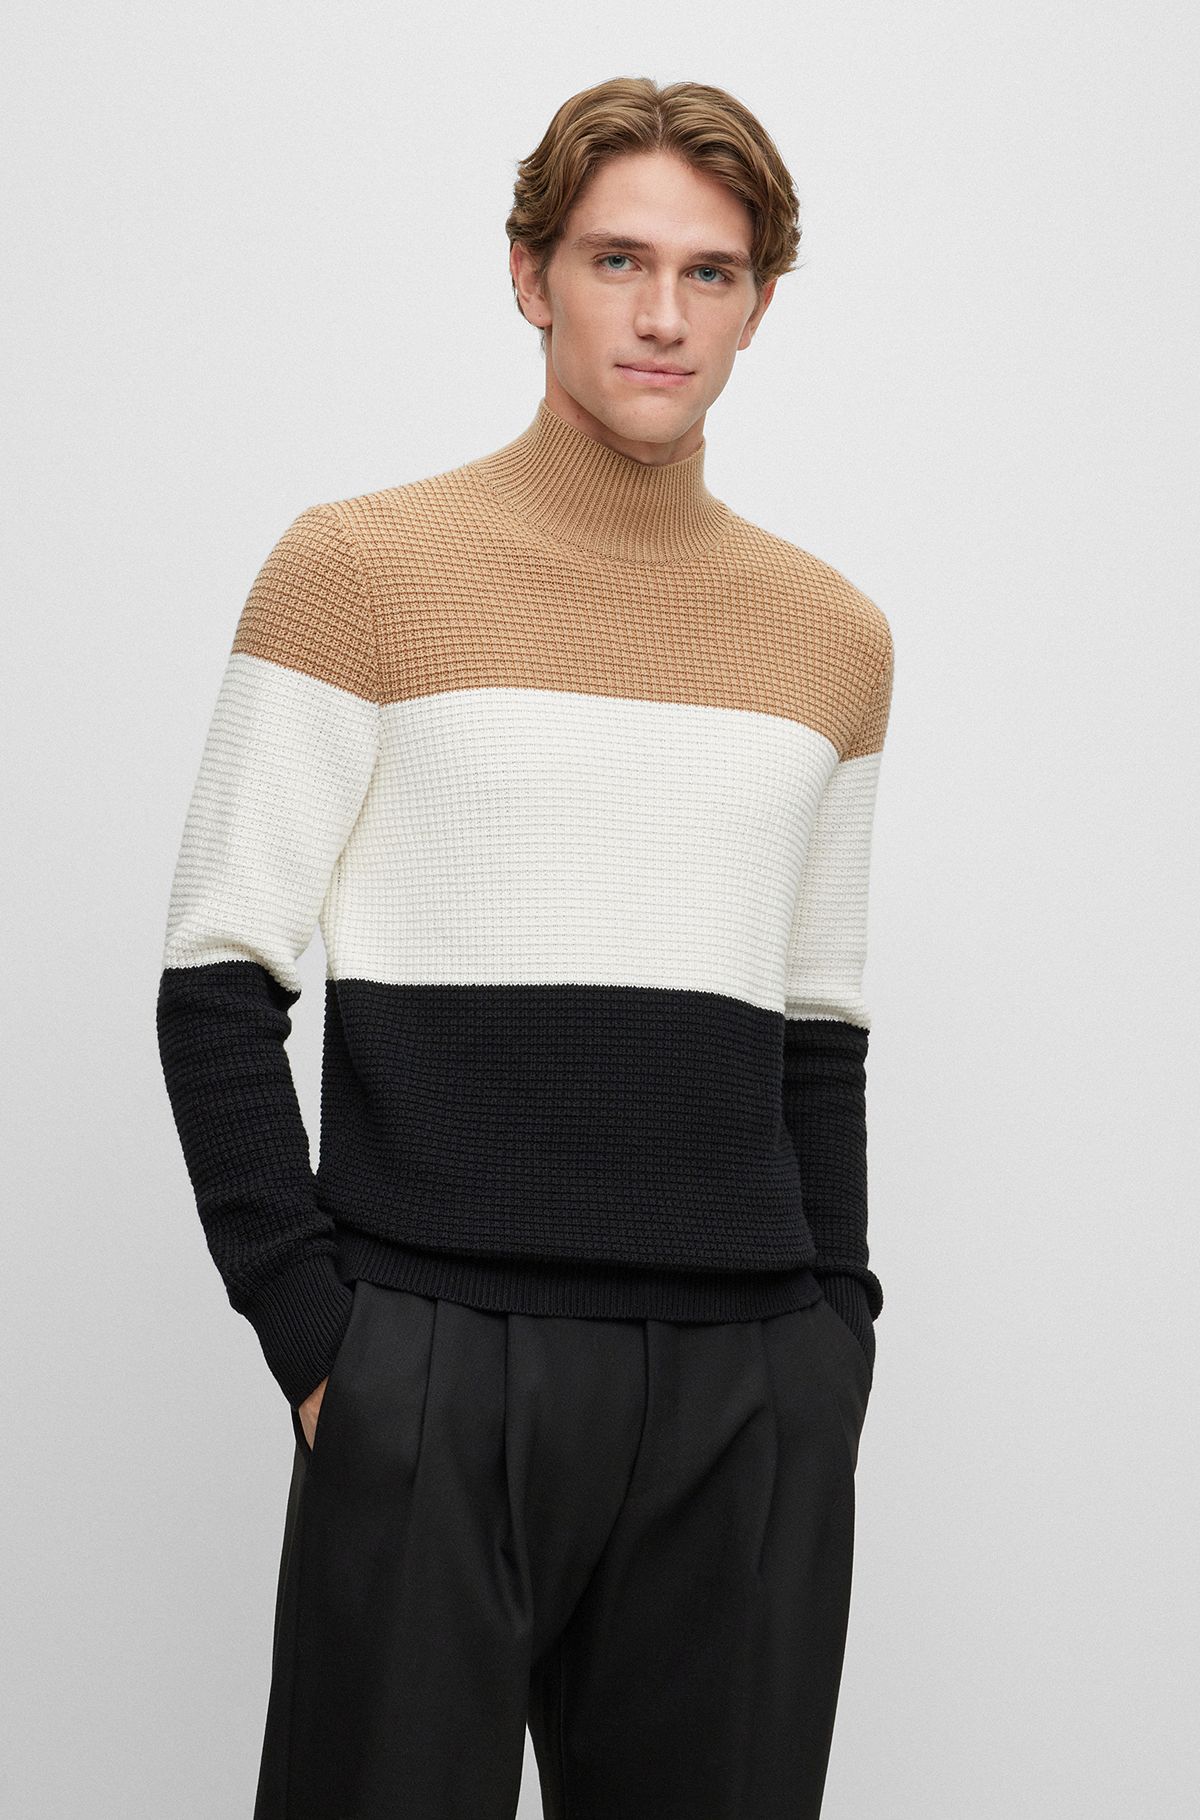 Mock-neck sweater in structured cotton and virgin wool, Black  /  White  /  Beige